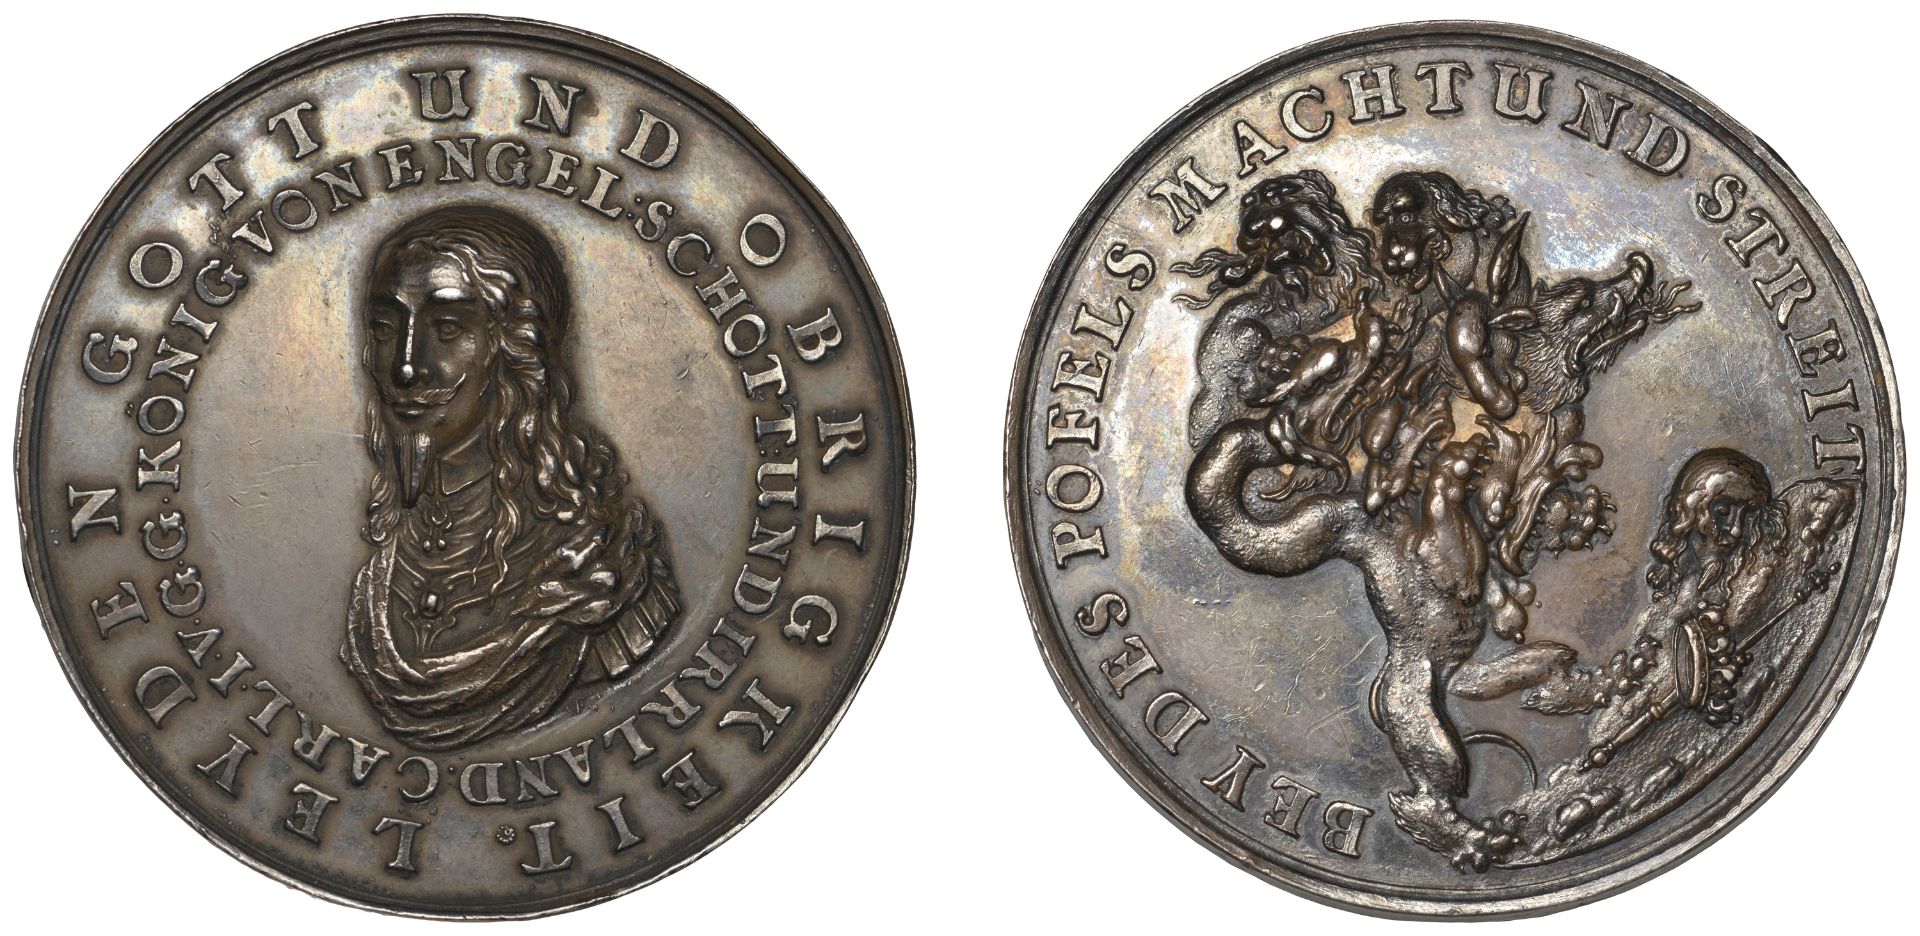 Charles I, Memorial, 1649, a silver medal by an uncertain medallist, probably of Dutch or Ge...